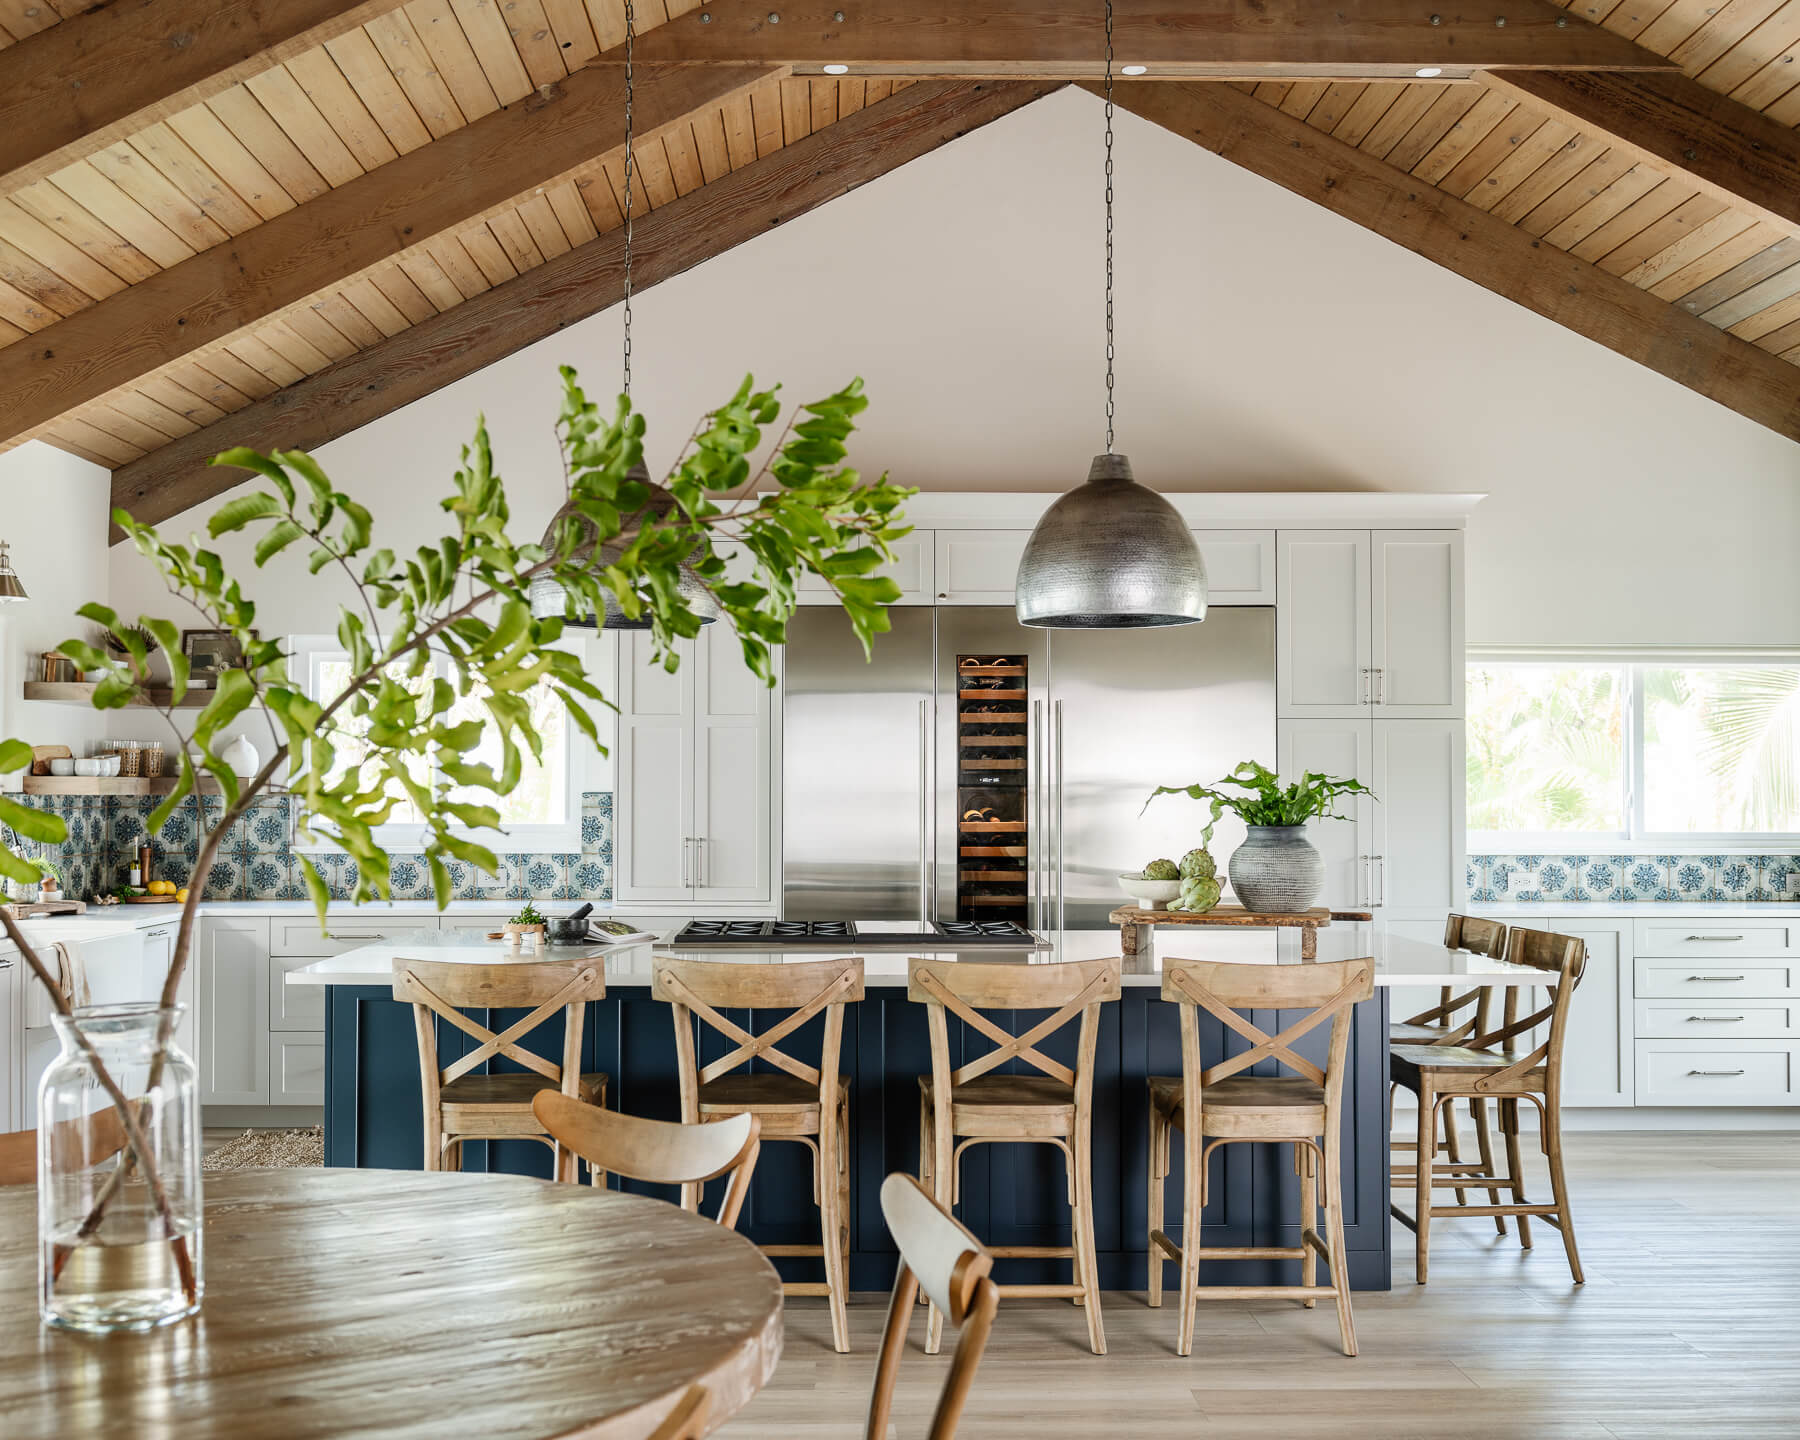 A modern farmhouse kitchen remodel with white and navy blue painted cabinets.